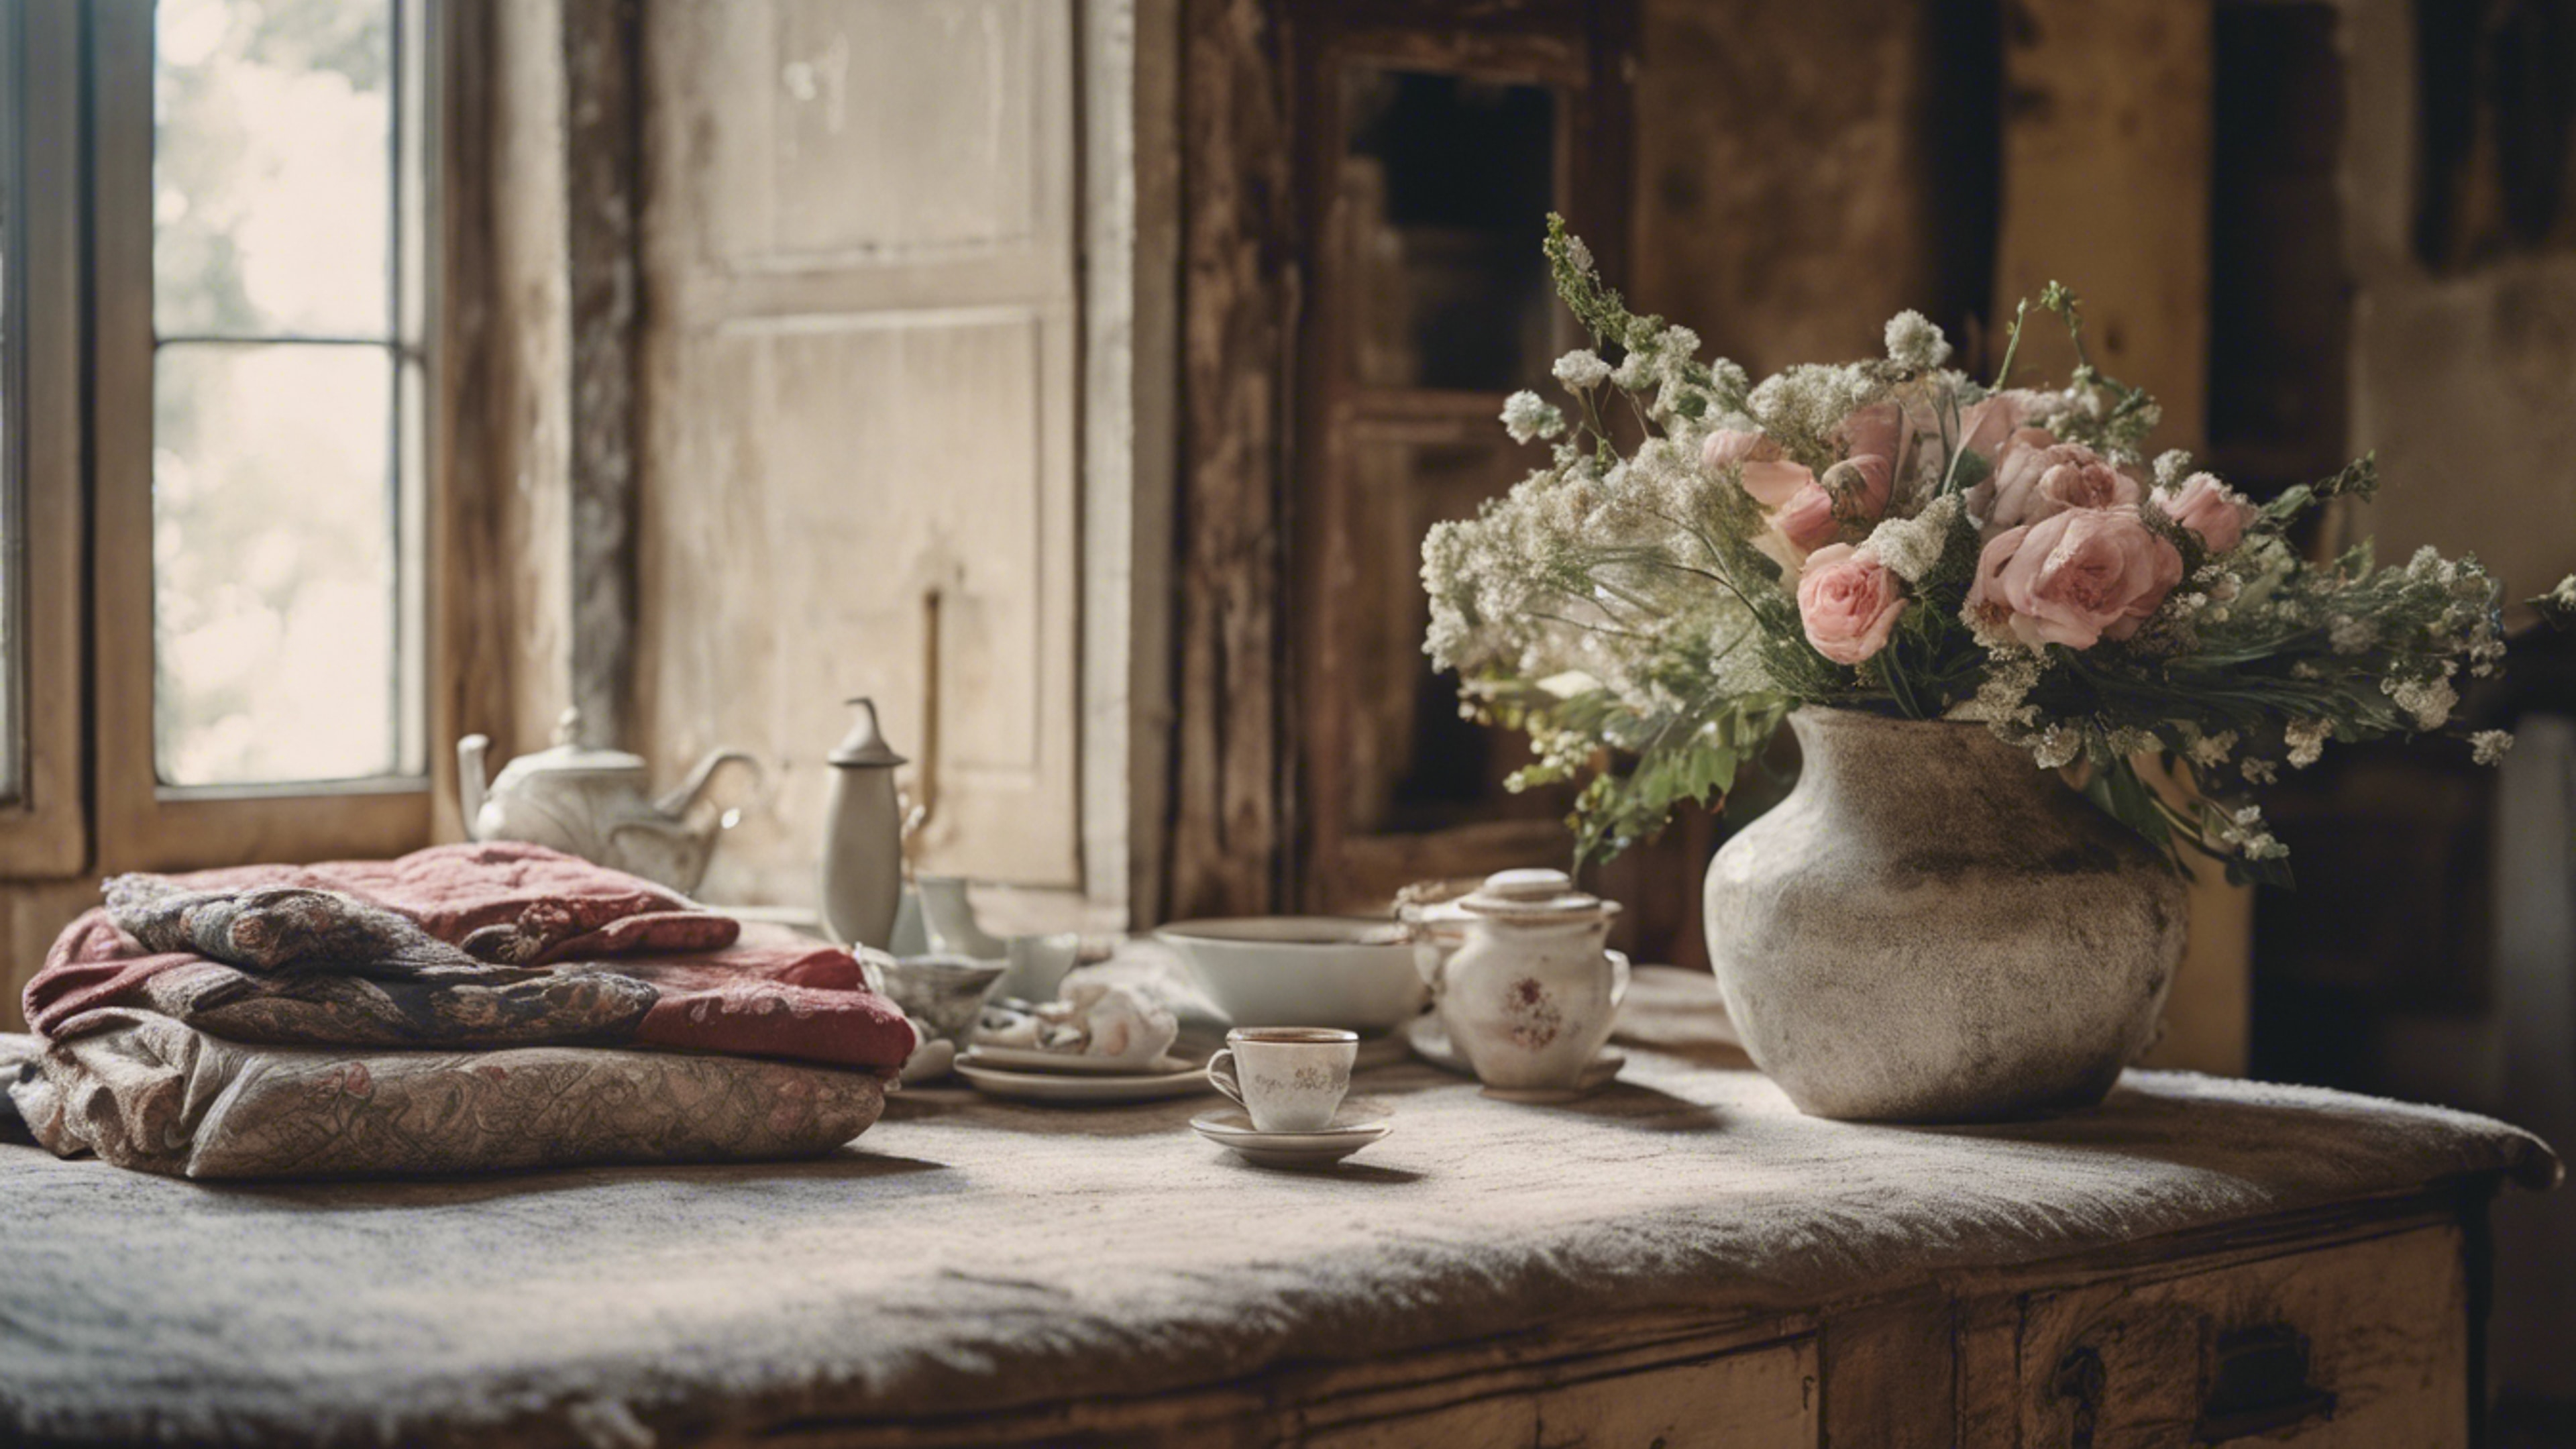 Vintage French country home interiors, full of hand-stitched textiles, distressed furniture, and fresh flowers. 벽지[3ce768b1b5e34f149bef]